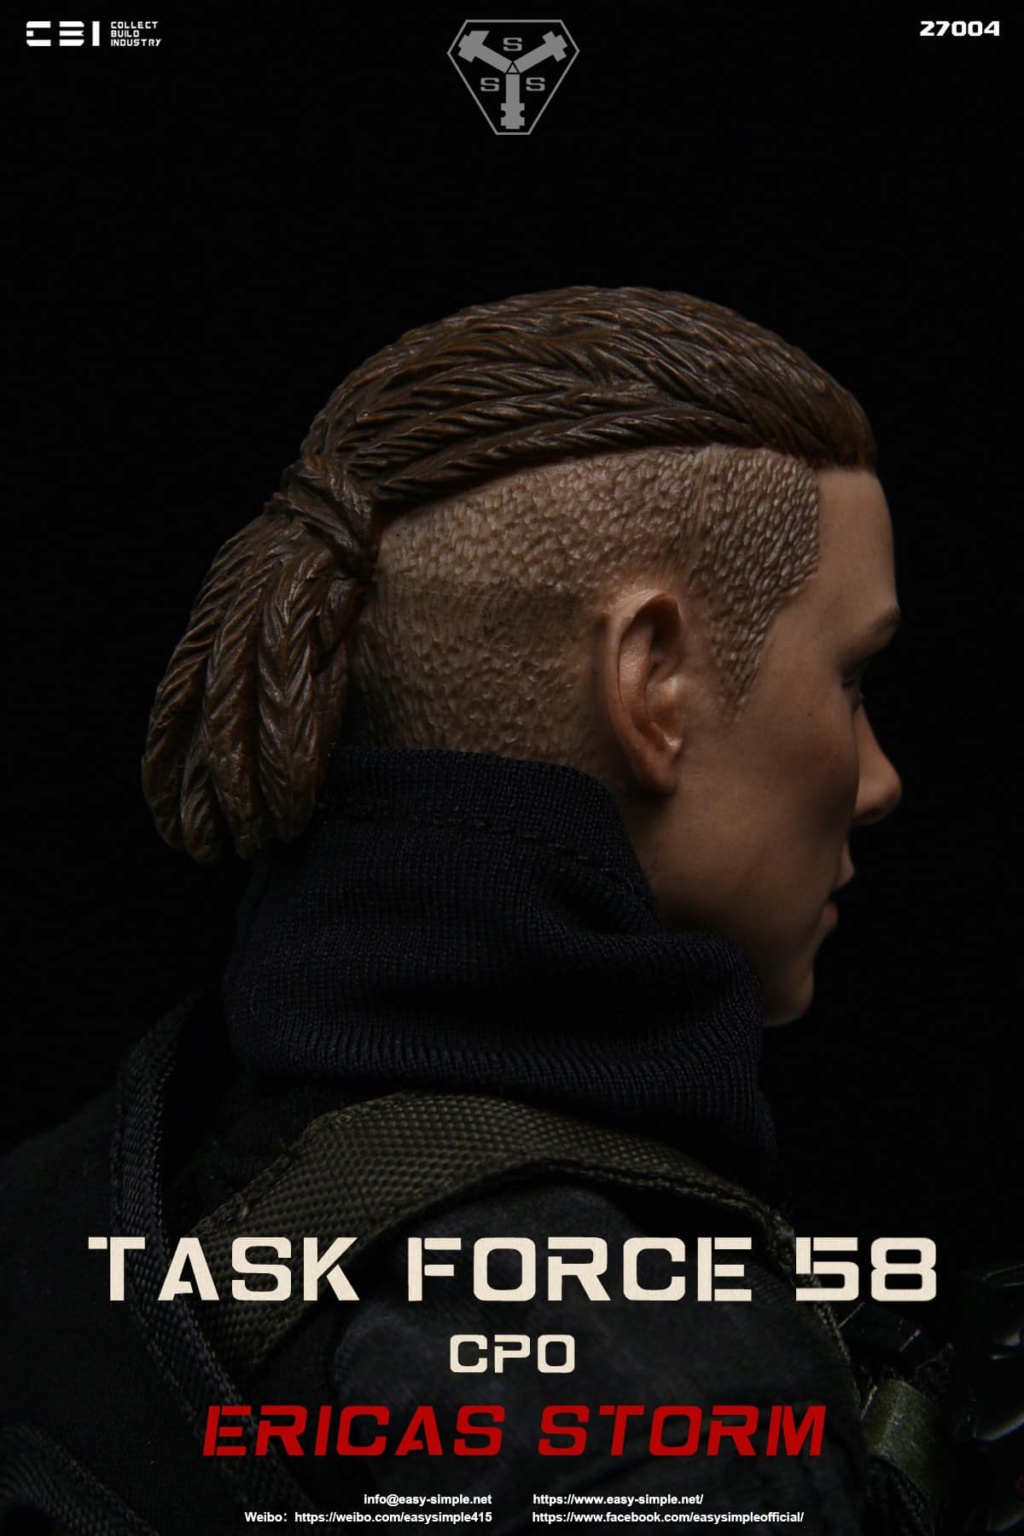 comicbook - NEW PRODUCT: CBI & Easy&Simple: 27004 1/6 ERICA STORM - TASK FORCE 58 CPO action figure 4731